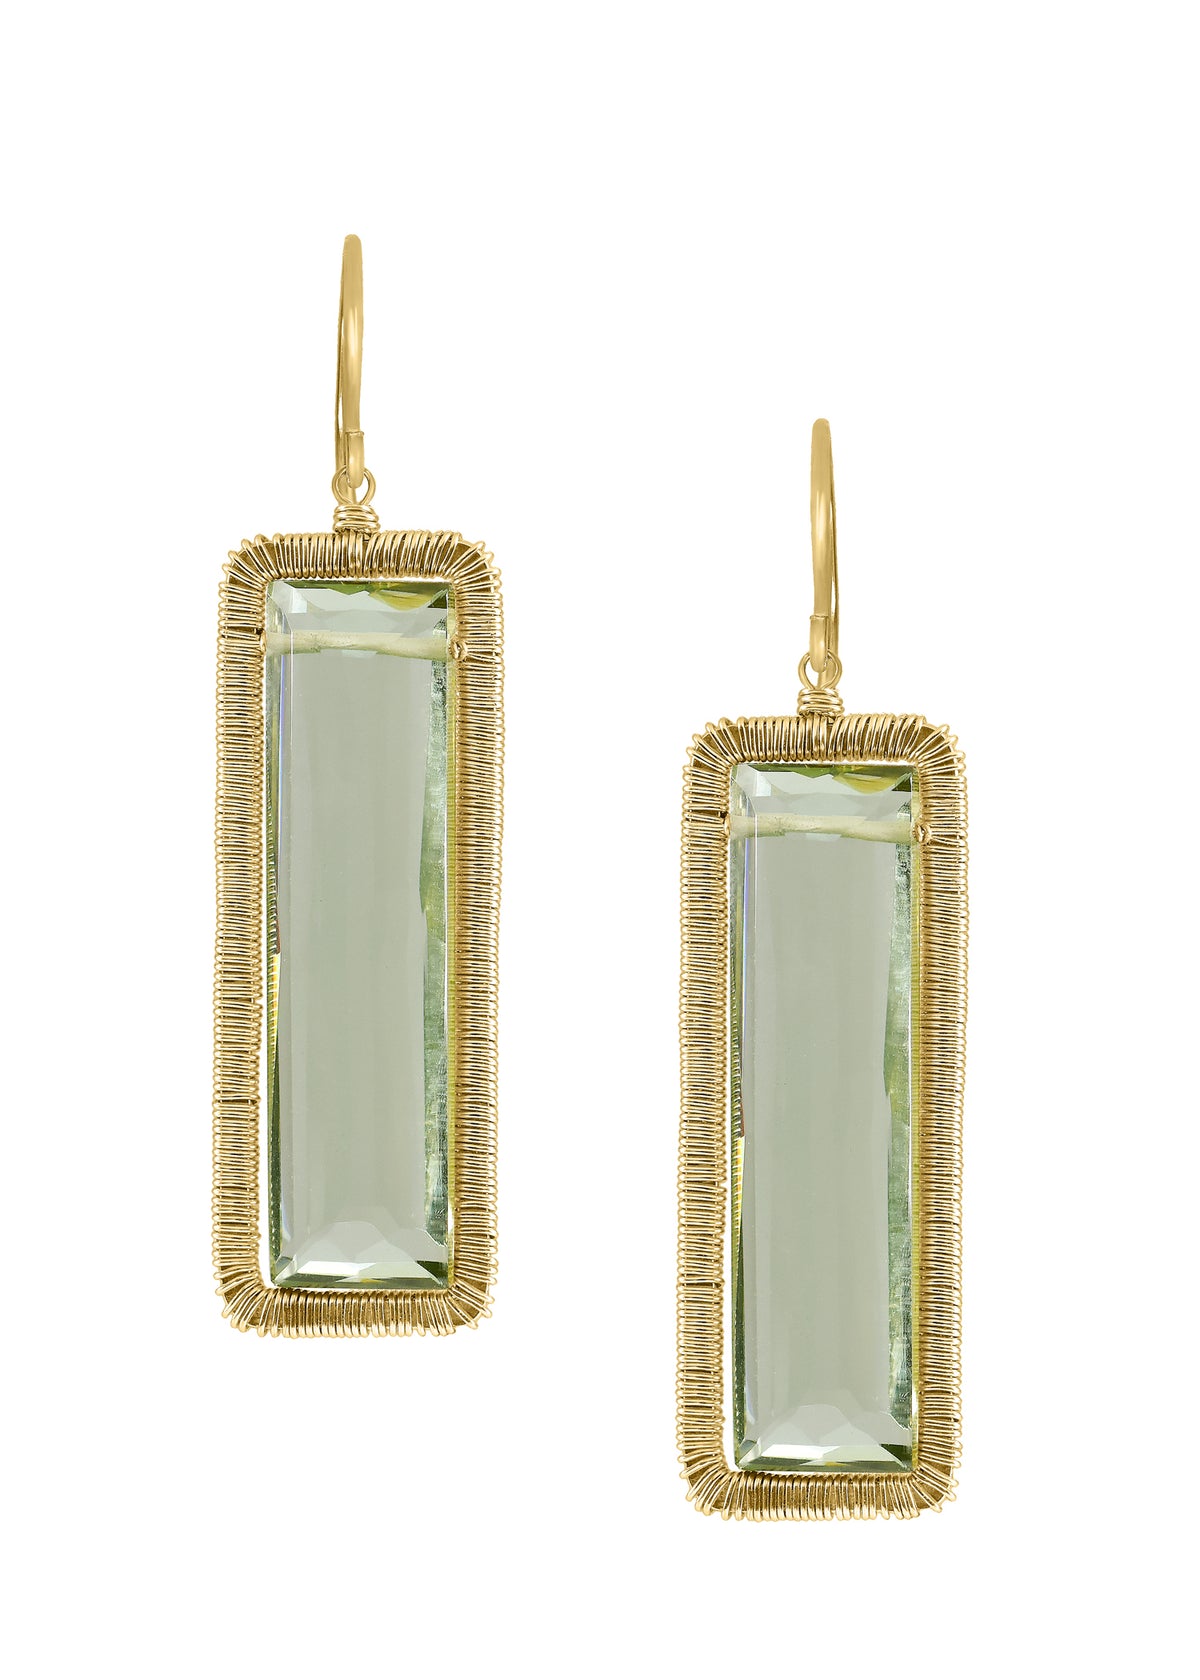 Green quartz 14k gold fill Earrings measure 1-3/4&quot; in length (including the ear wires) and 7/16&quot; in width Handmade in our Los Angeles studio